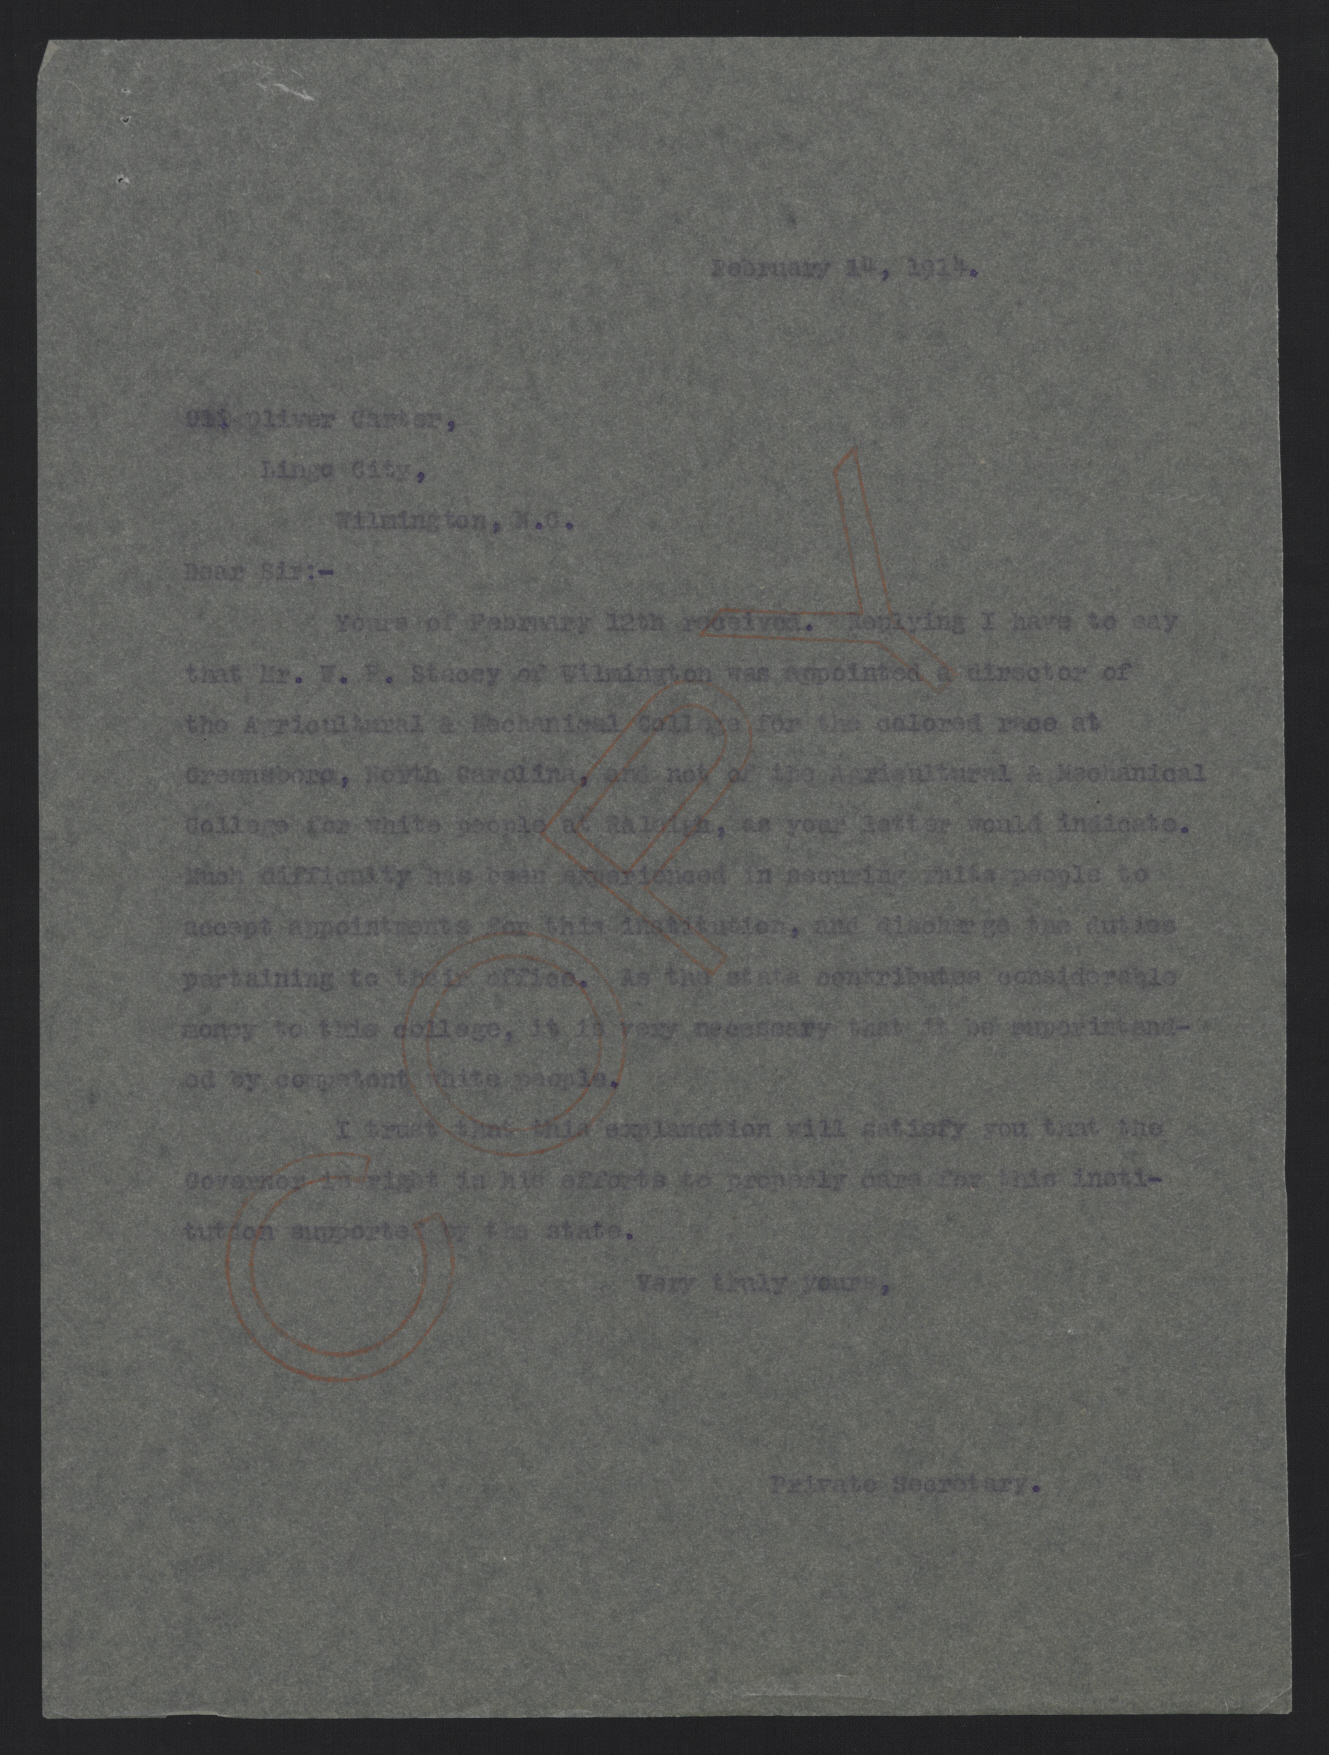 Letter from Kerr to Carter, February 14, 1914